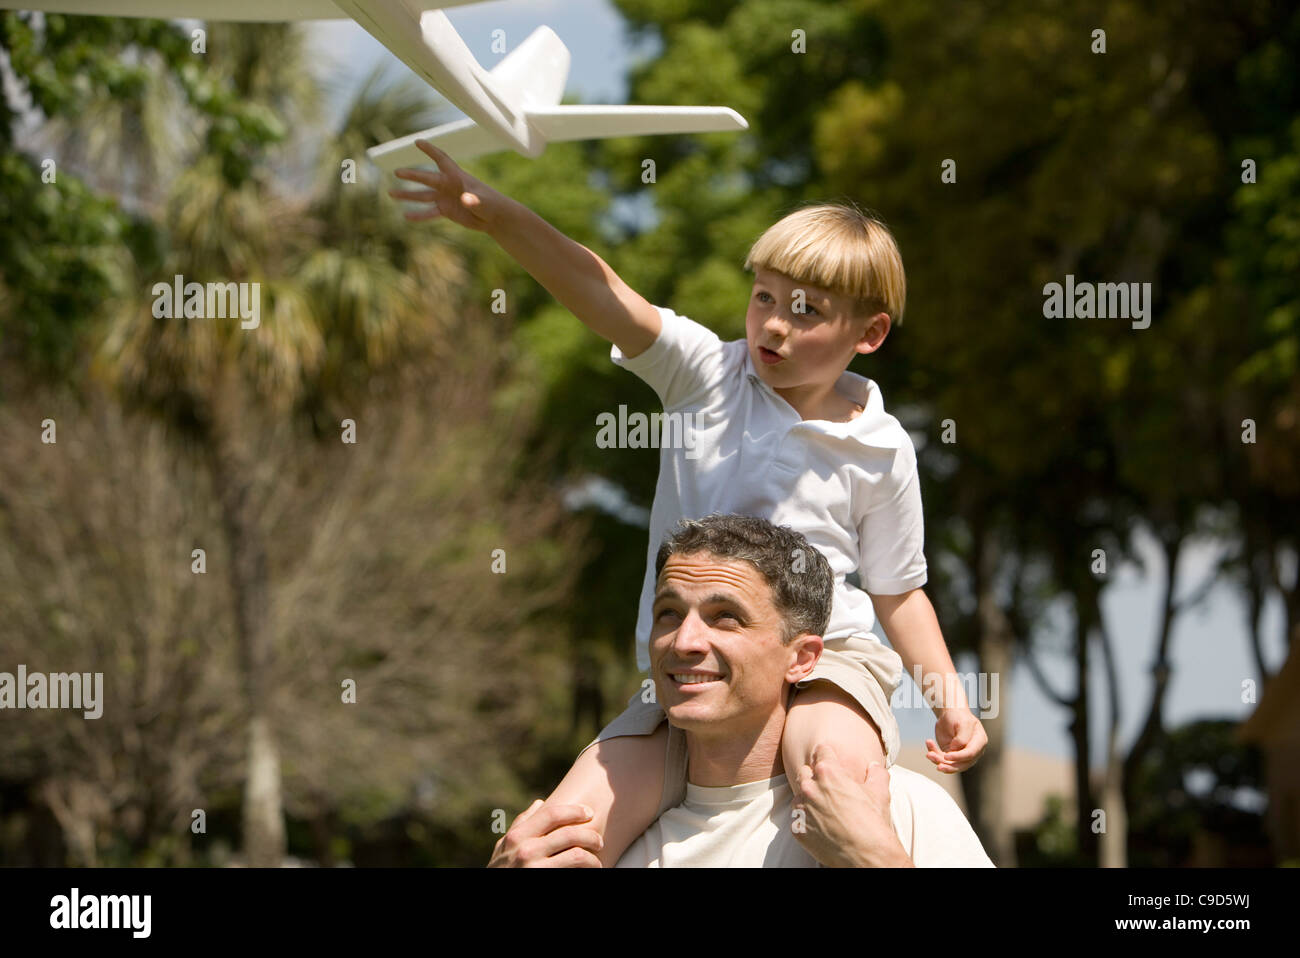 Father and son with a toy glider Stock Photo